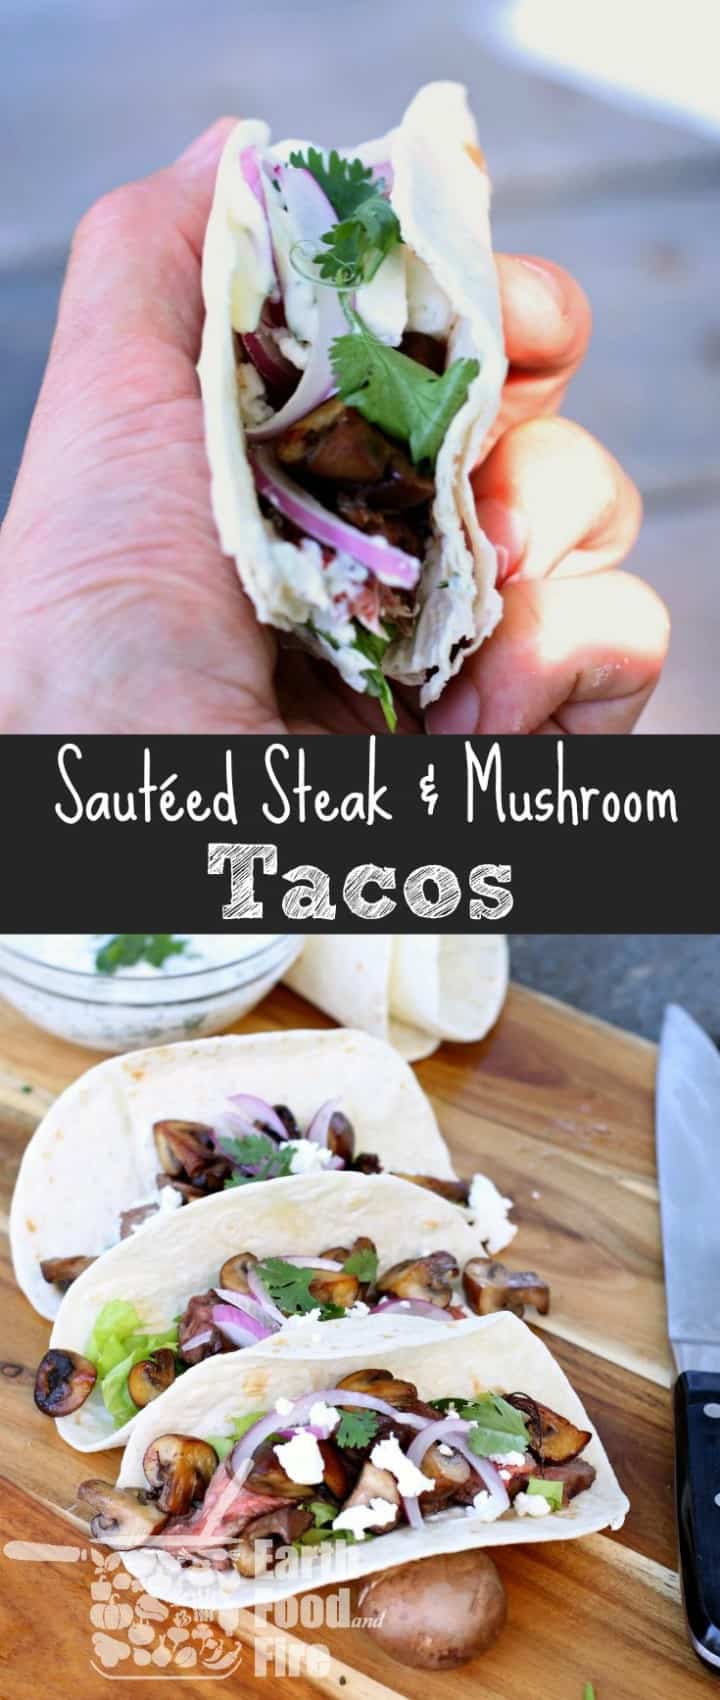 Steak and mushrooms are the definition of comfort food! So why not wrap them up in a taco and do taco's better then anyone else!? These steak tacos are the perfect appetizer or gourmet snack for mushroom lovers!